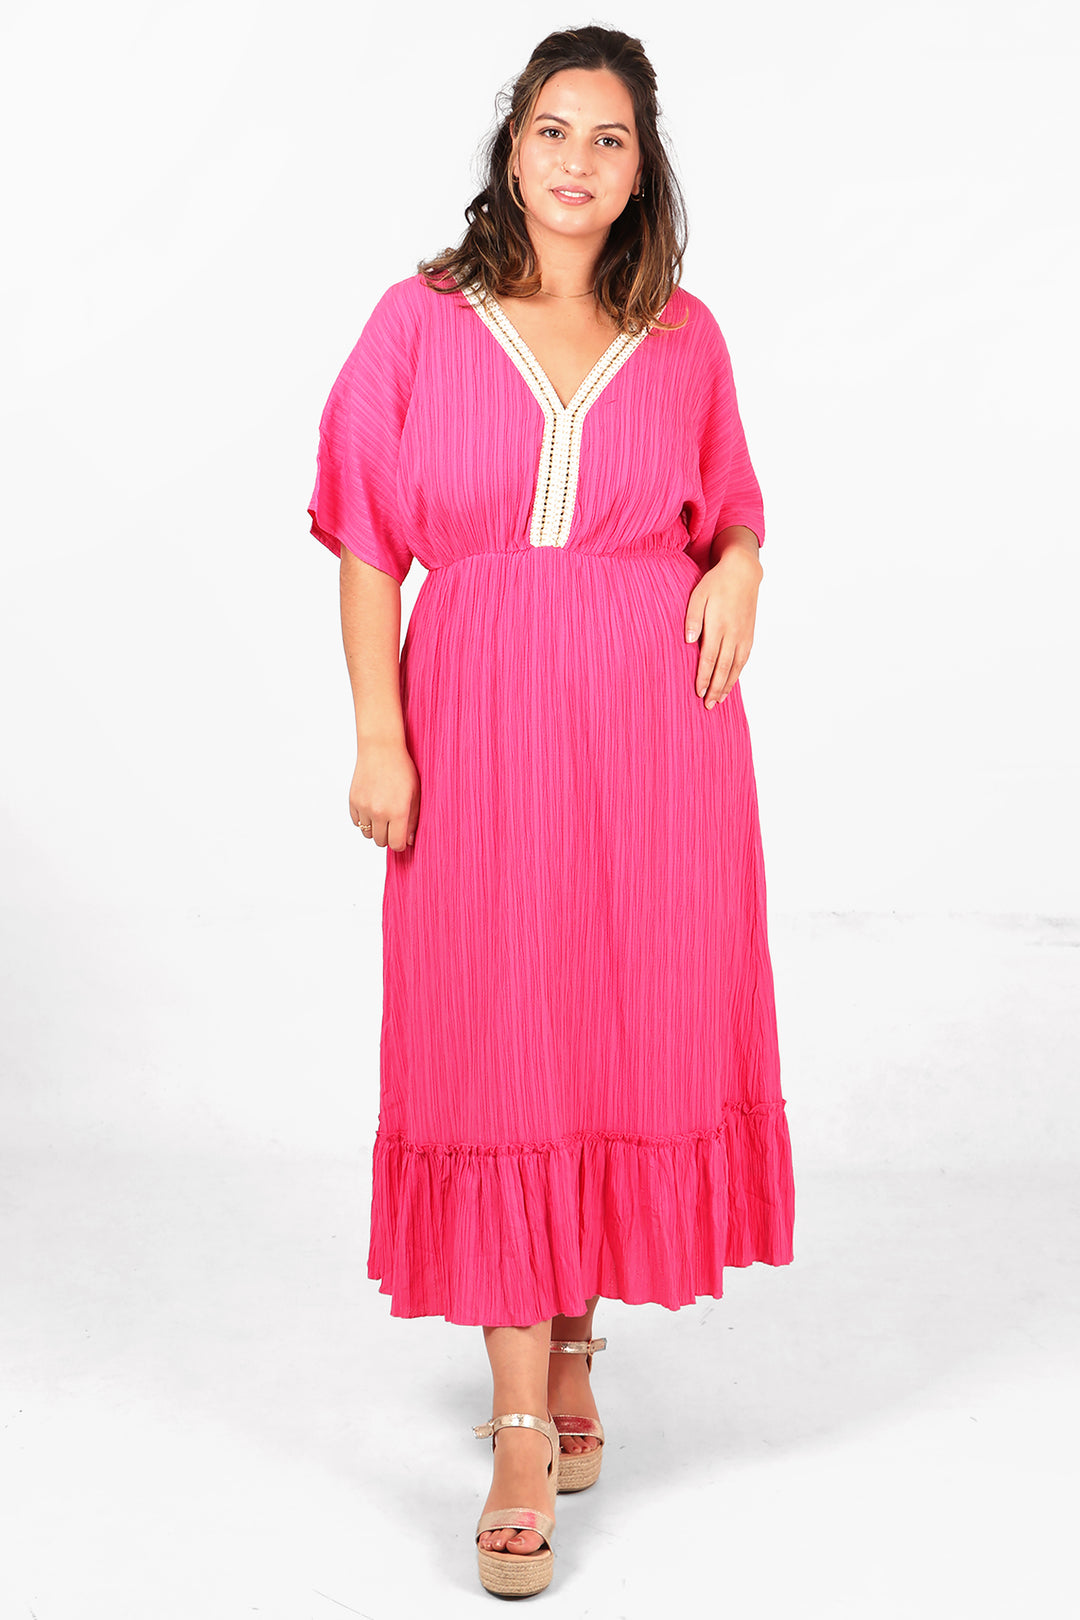 model wearing a midi length 3/4 sleeve pink dress with a v neck, there is white and gold robe trim around the v neck